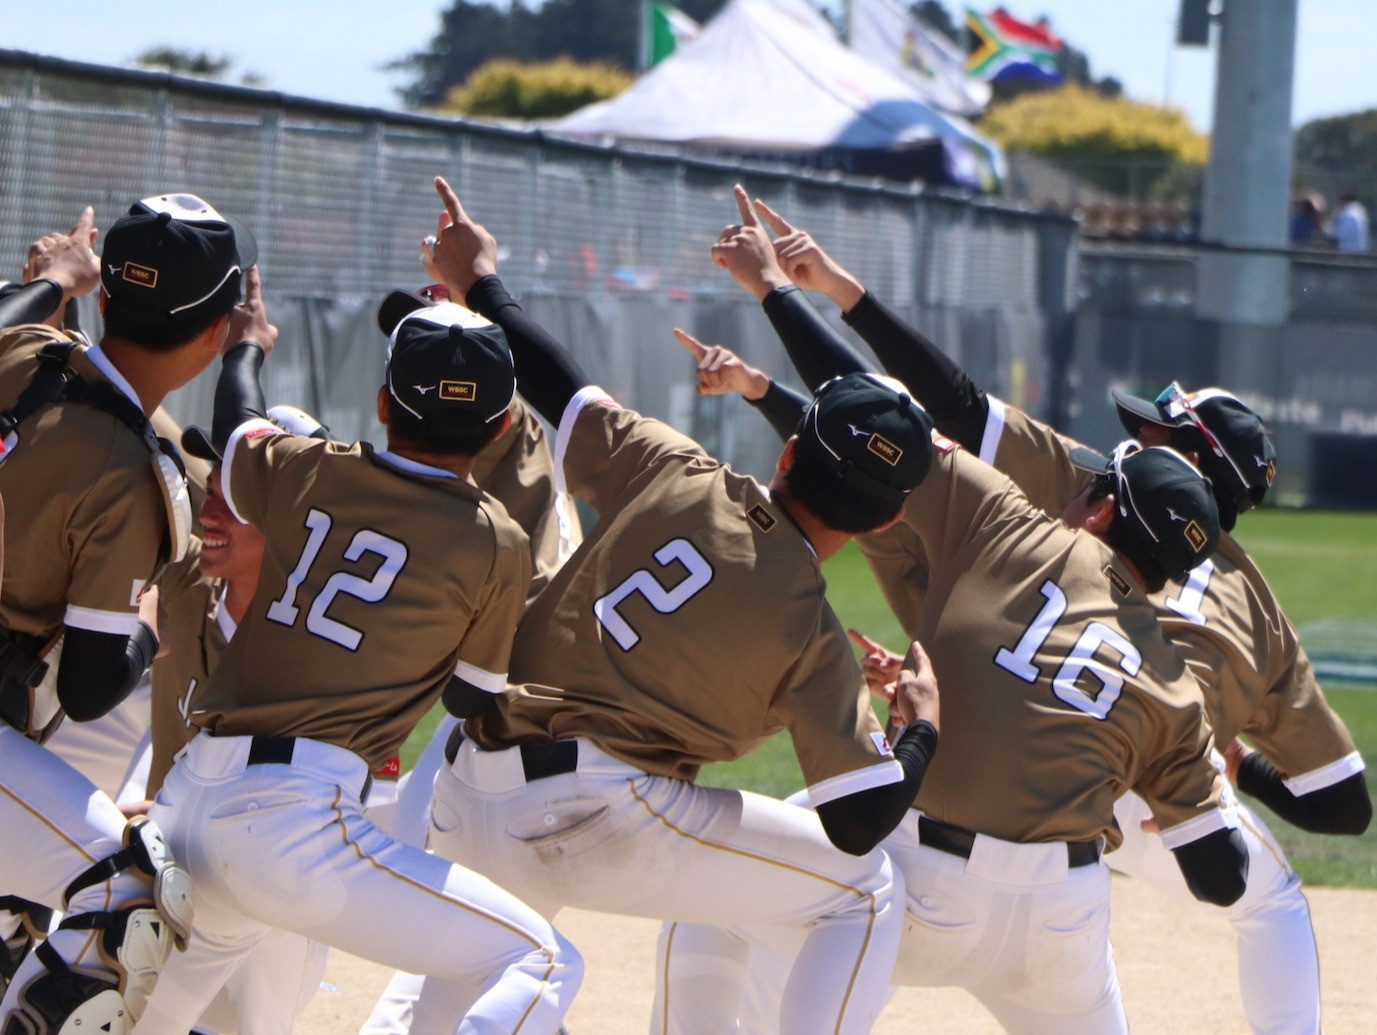 Japan thrashed Argentina at the event in New Zealand ©WBSC